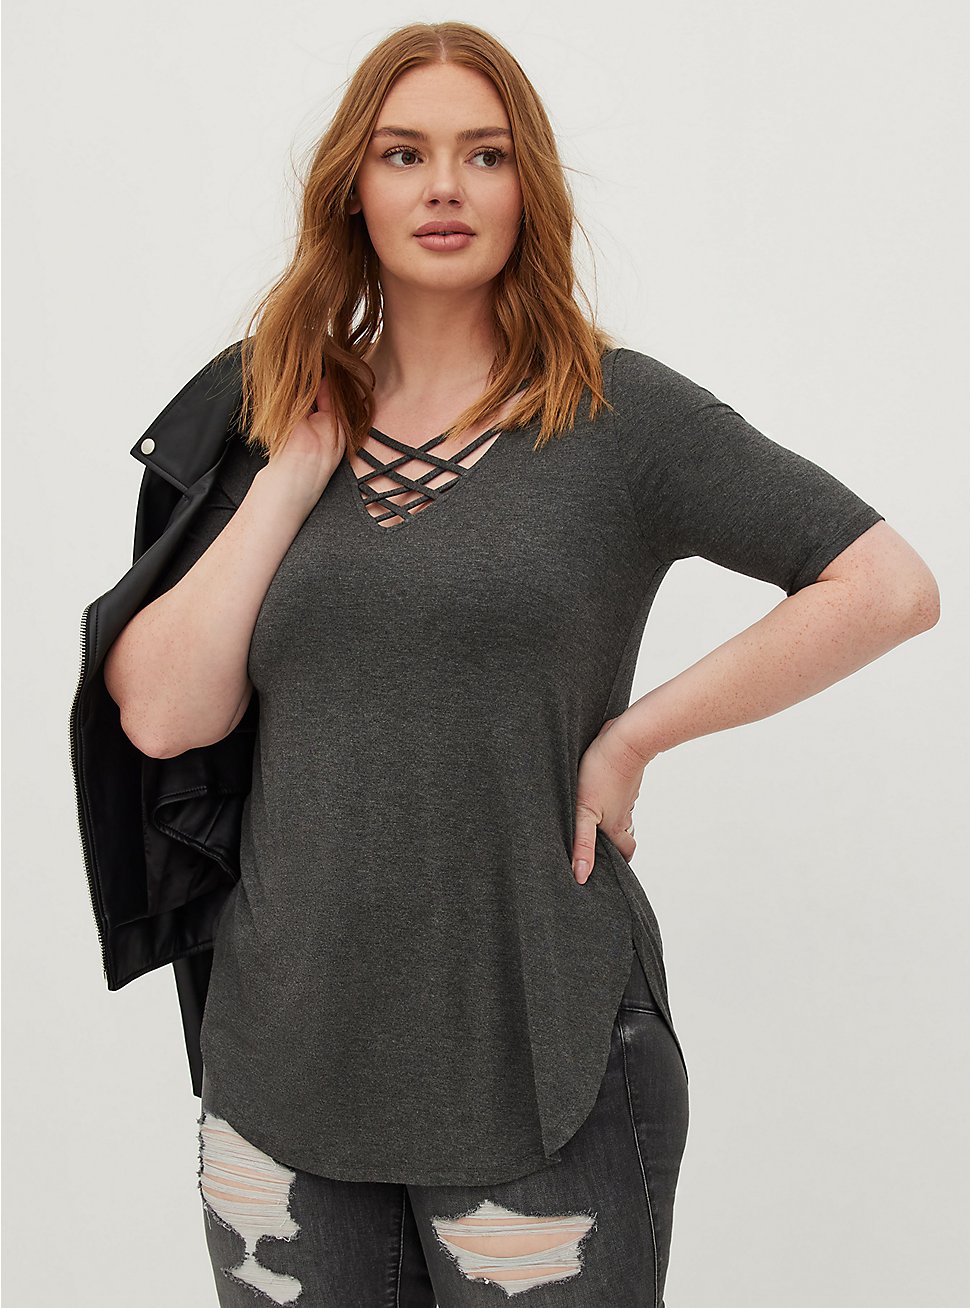 Plus Size Favorite Tunic Super Soft V-Neck Strappy Tunic Tee, CHARCOAL HEATHER GREY, hi-res